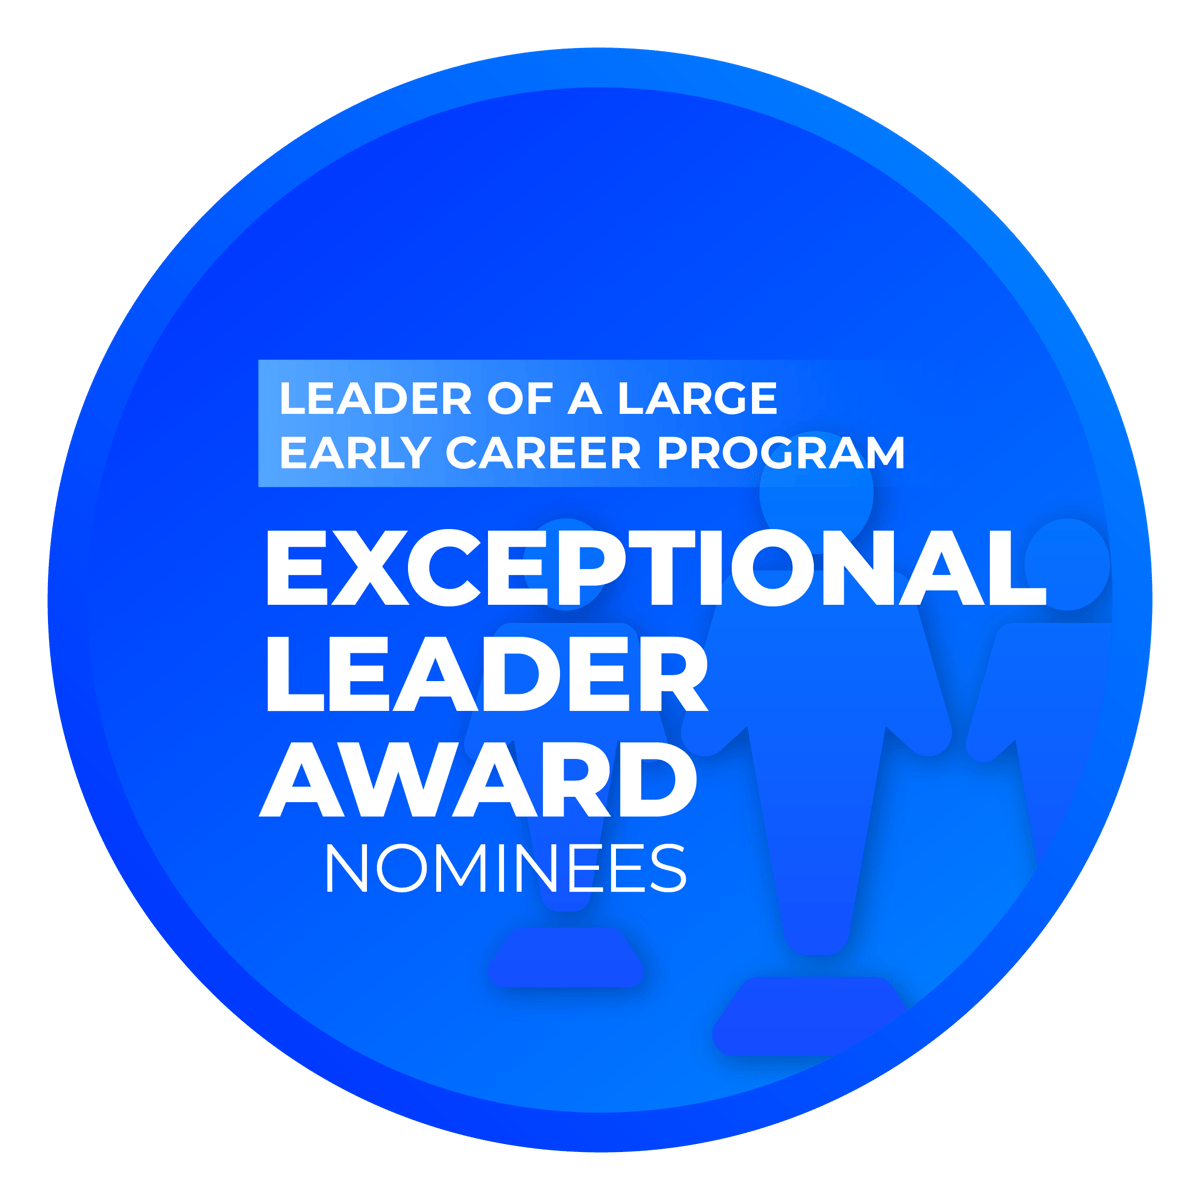 Exceptional Leader Award: Large Early Career Program Nominees